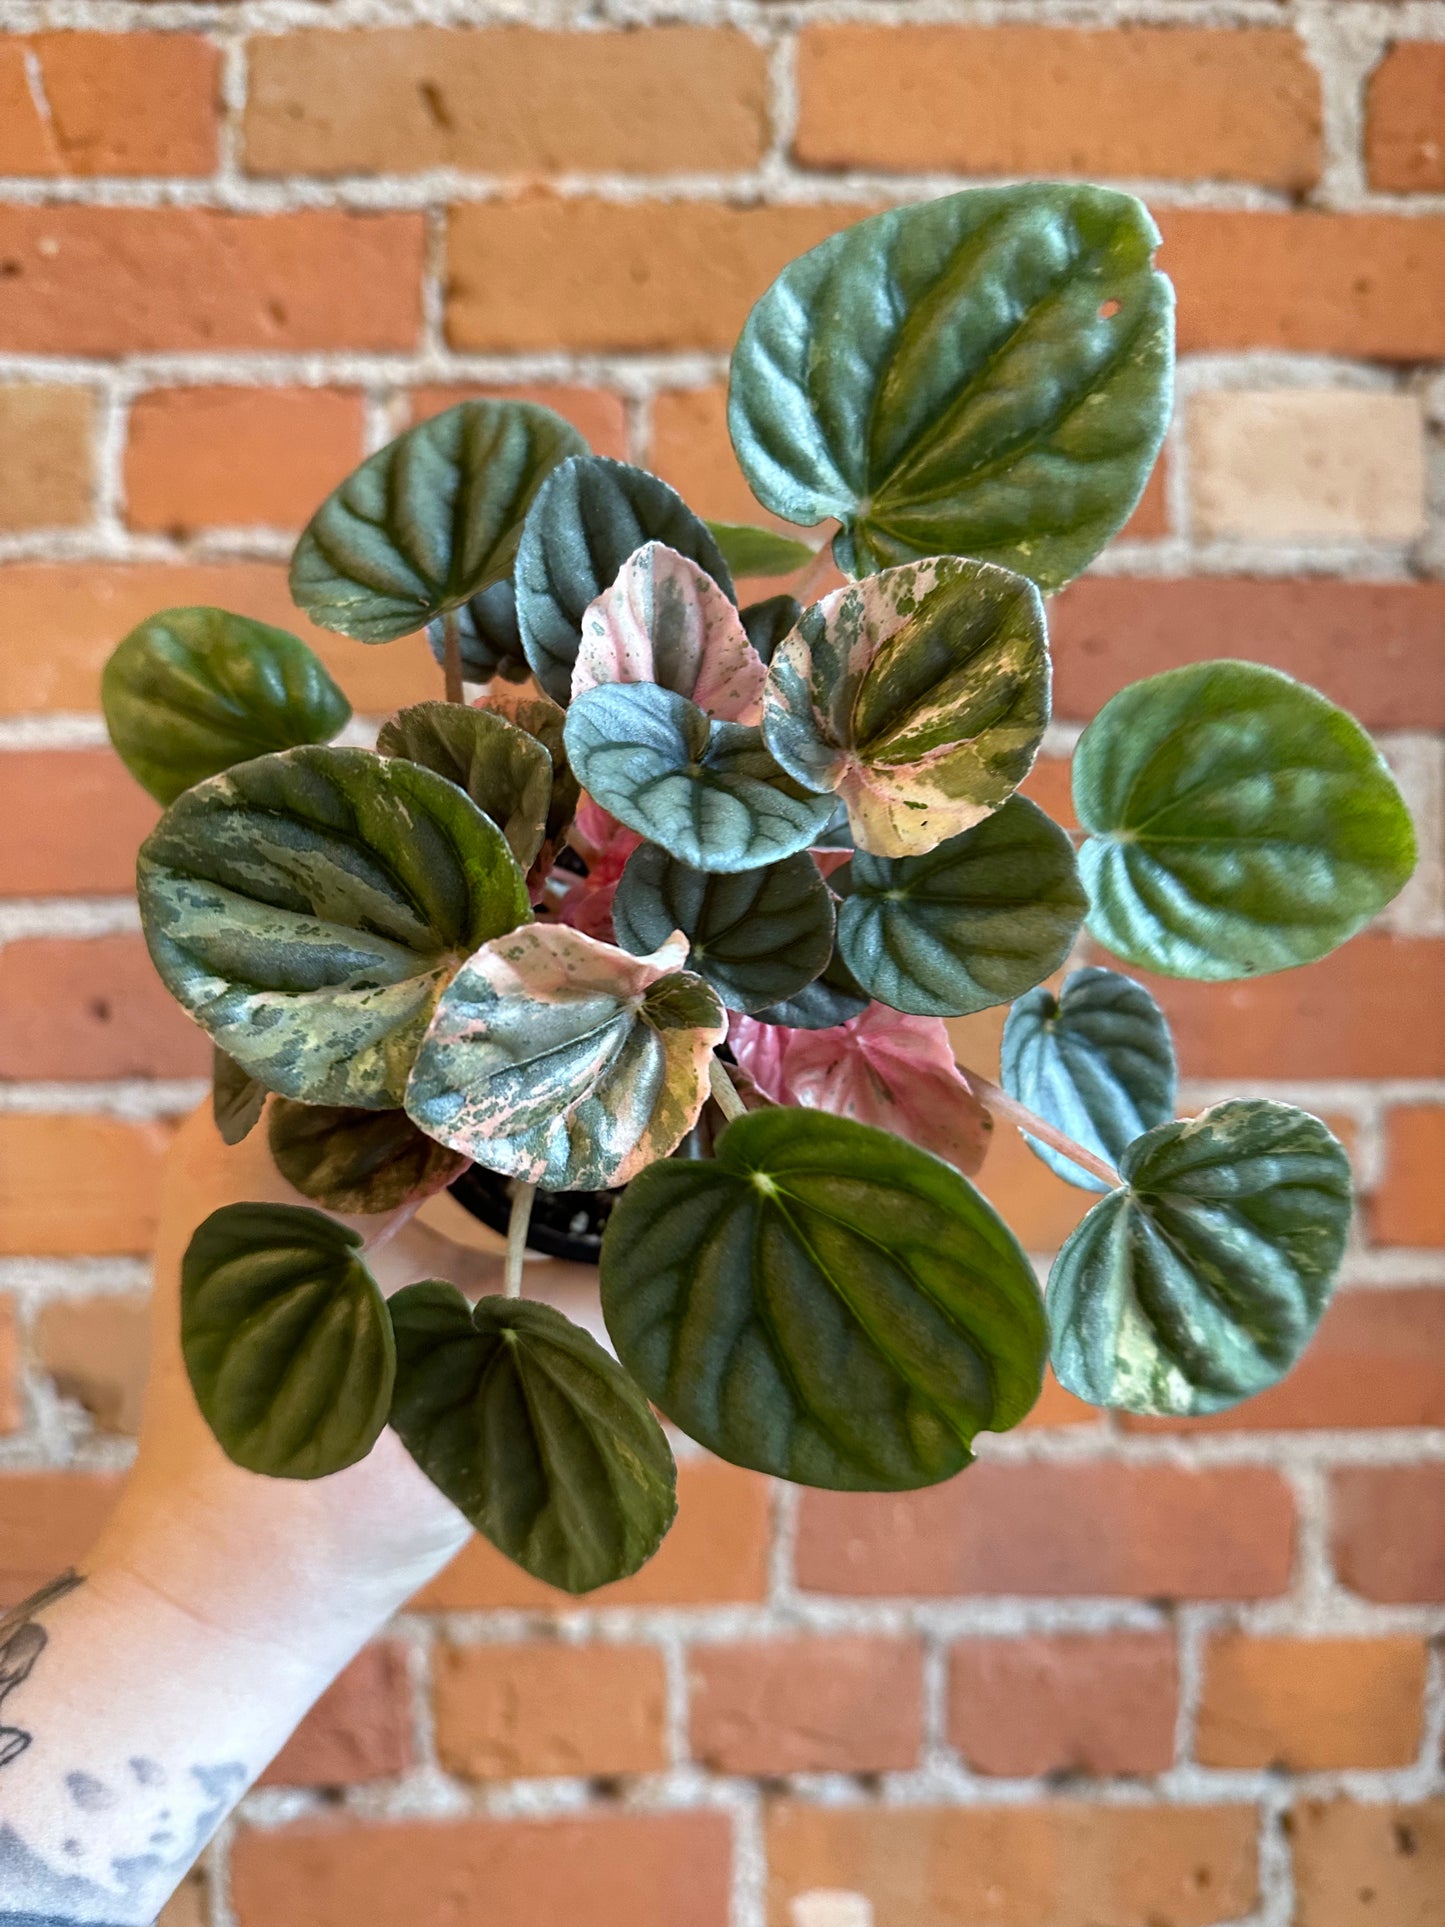 3.5" Peperomia Pink Lady